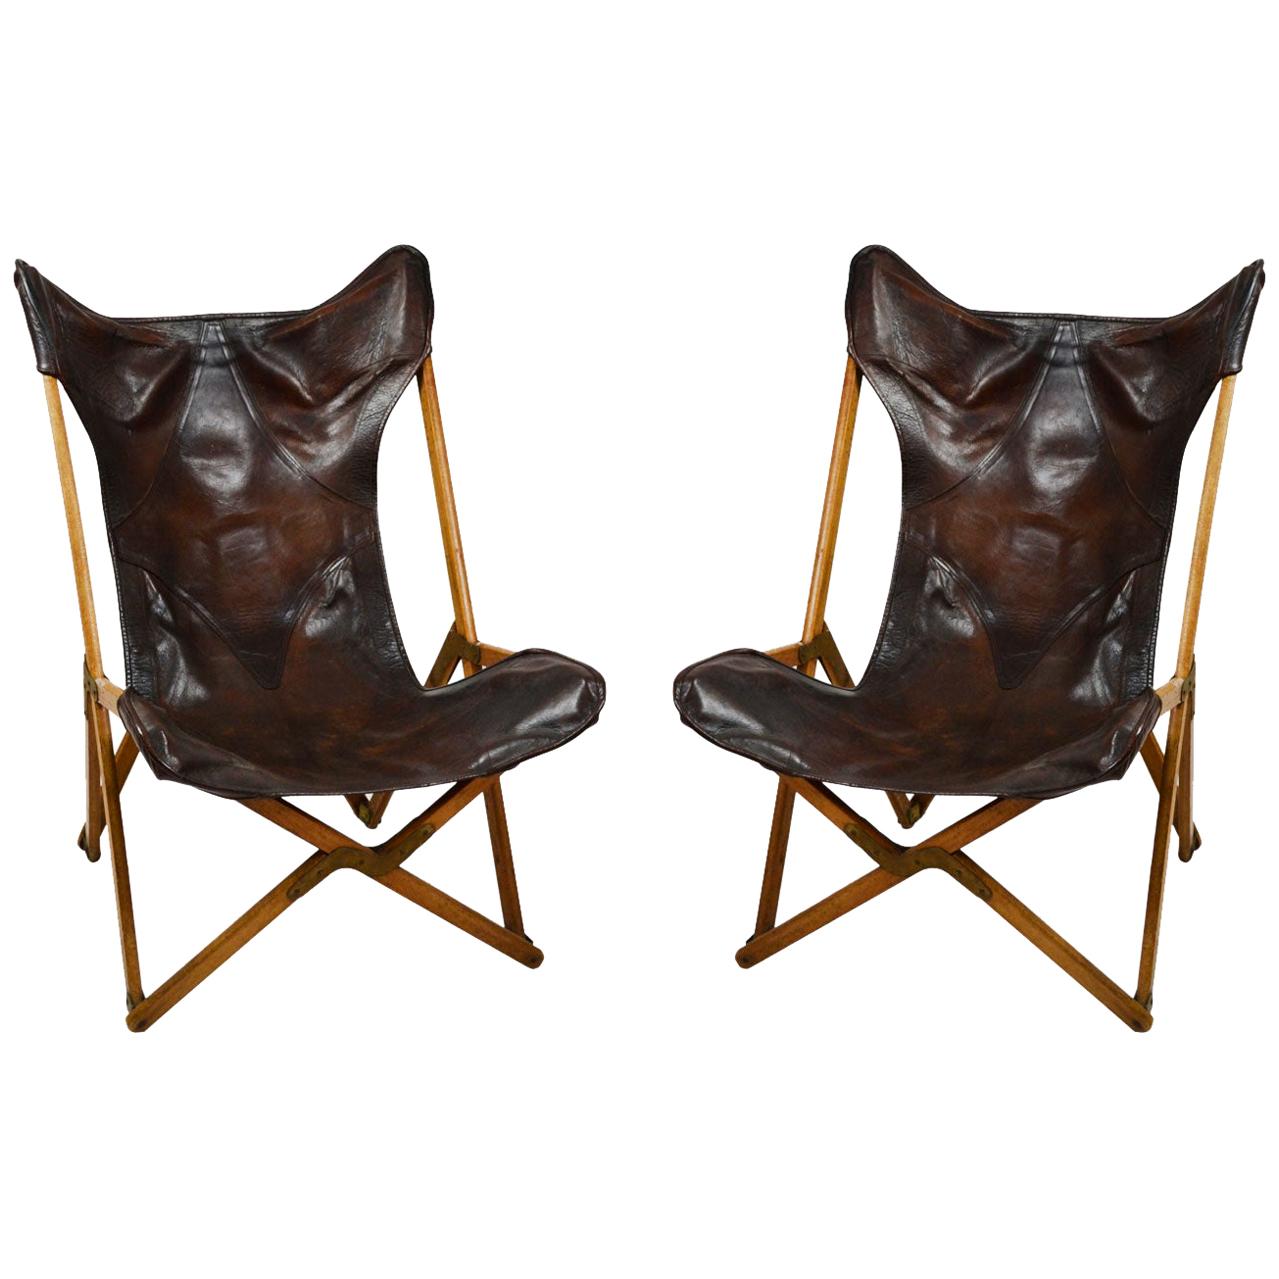 20th Century Paolo Viganò Tripolina Folding Armchairs in Leather and Wood, Pair